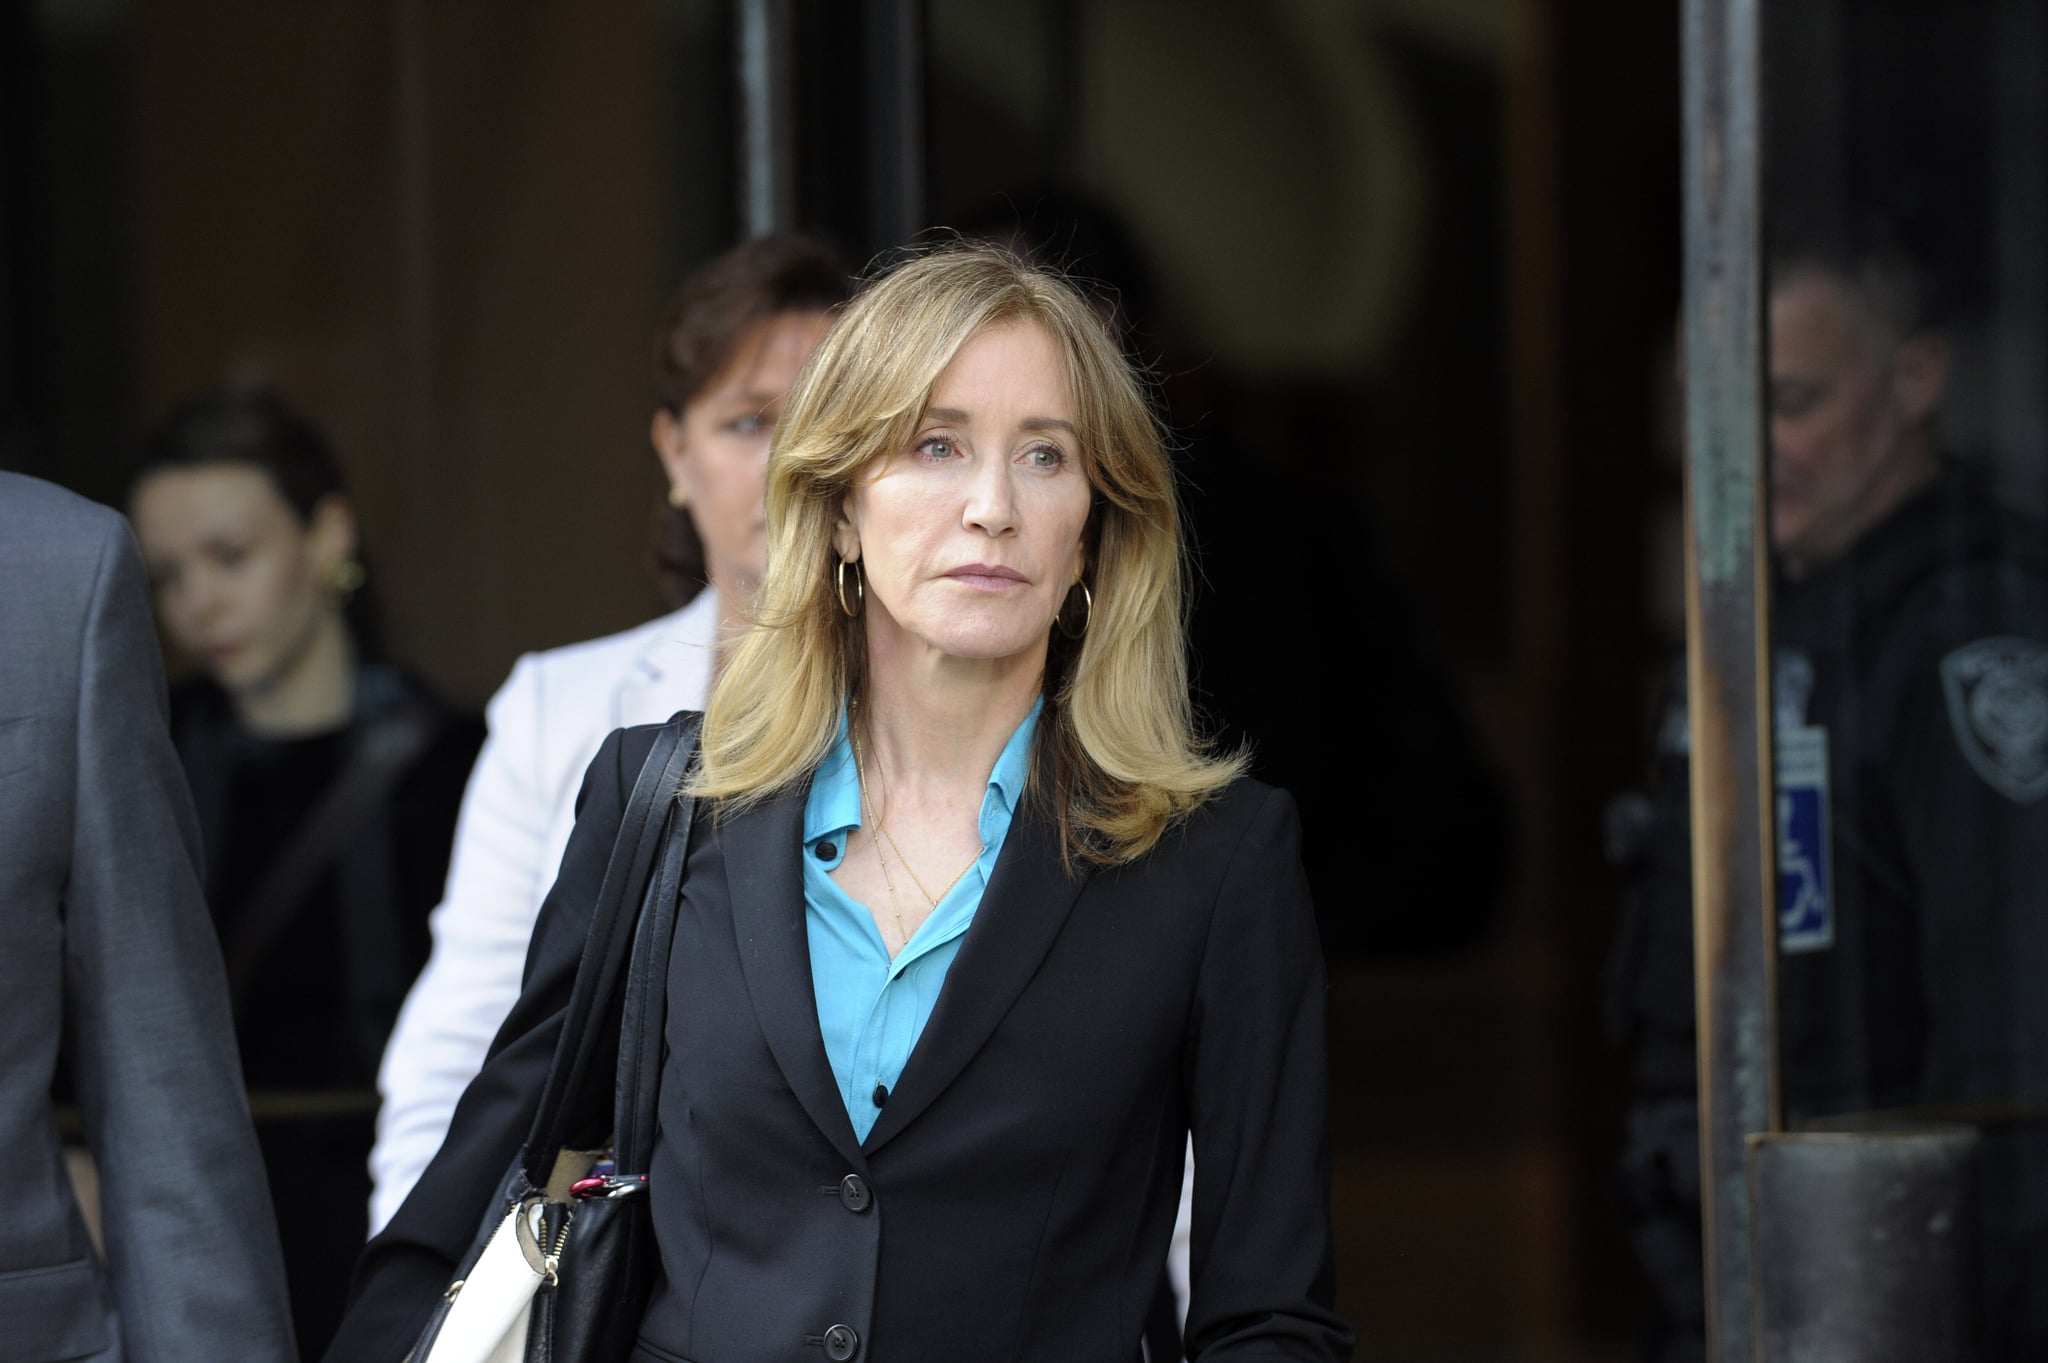 Actress Felicity Huffman exits the courthouse after facing charges for allegedly conspiring to commit mail fraud and other charges in the college admissions scandal at the John Joseph Moakley United States Courthouse in Boston on April 3, 2019. (Photo by Joseph Prezioso / AFP)        (Photo credit should read JOSEPH PREZIOSO/AFP/Getty Images)